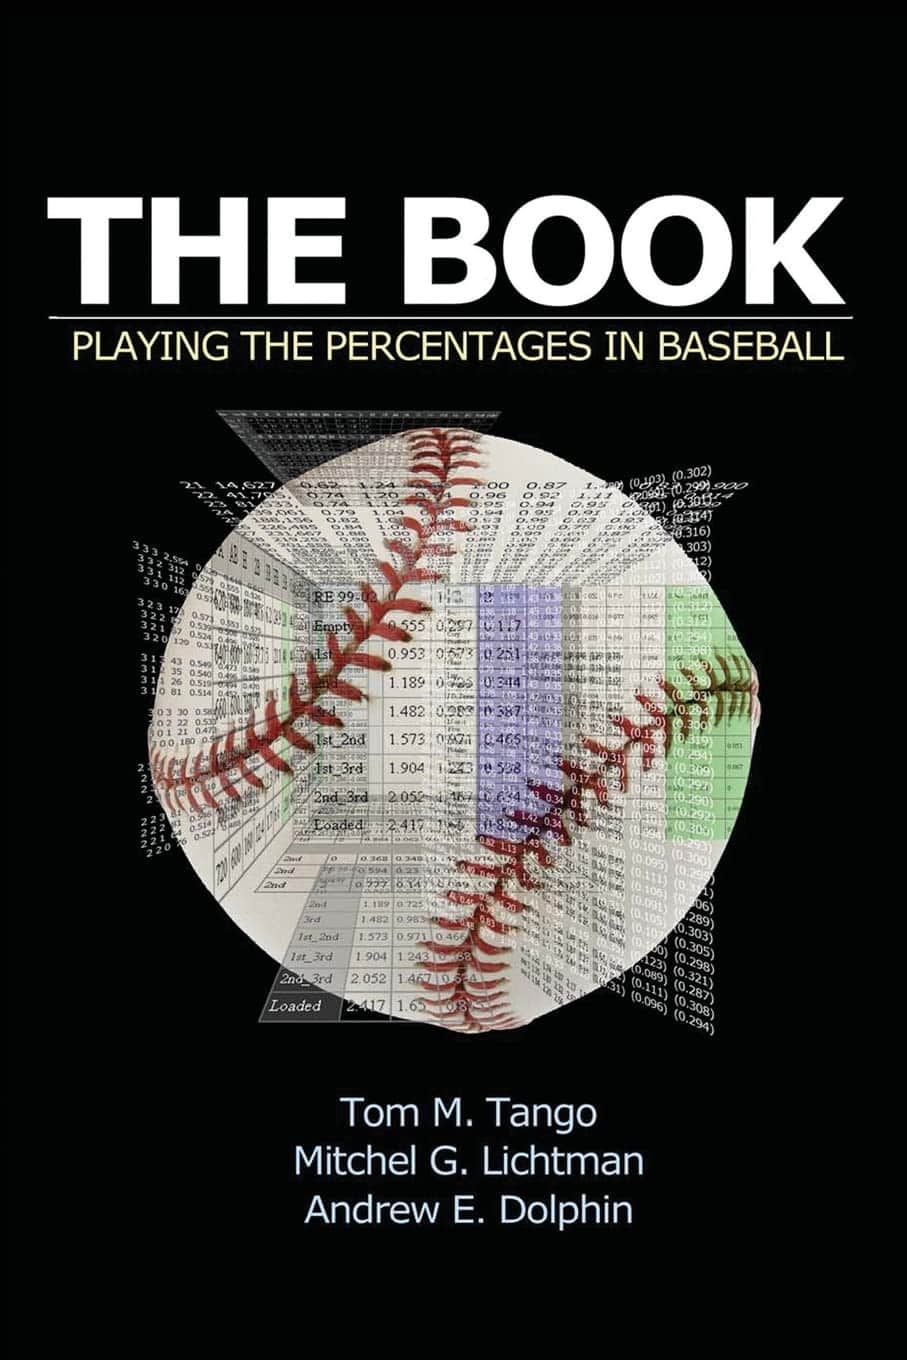 The Book: Playing the Percentages in Baseball, by Tom Tango, Mitchel Lichtman, and Andrew Dolphin